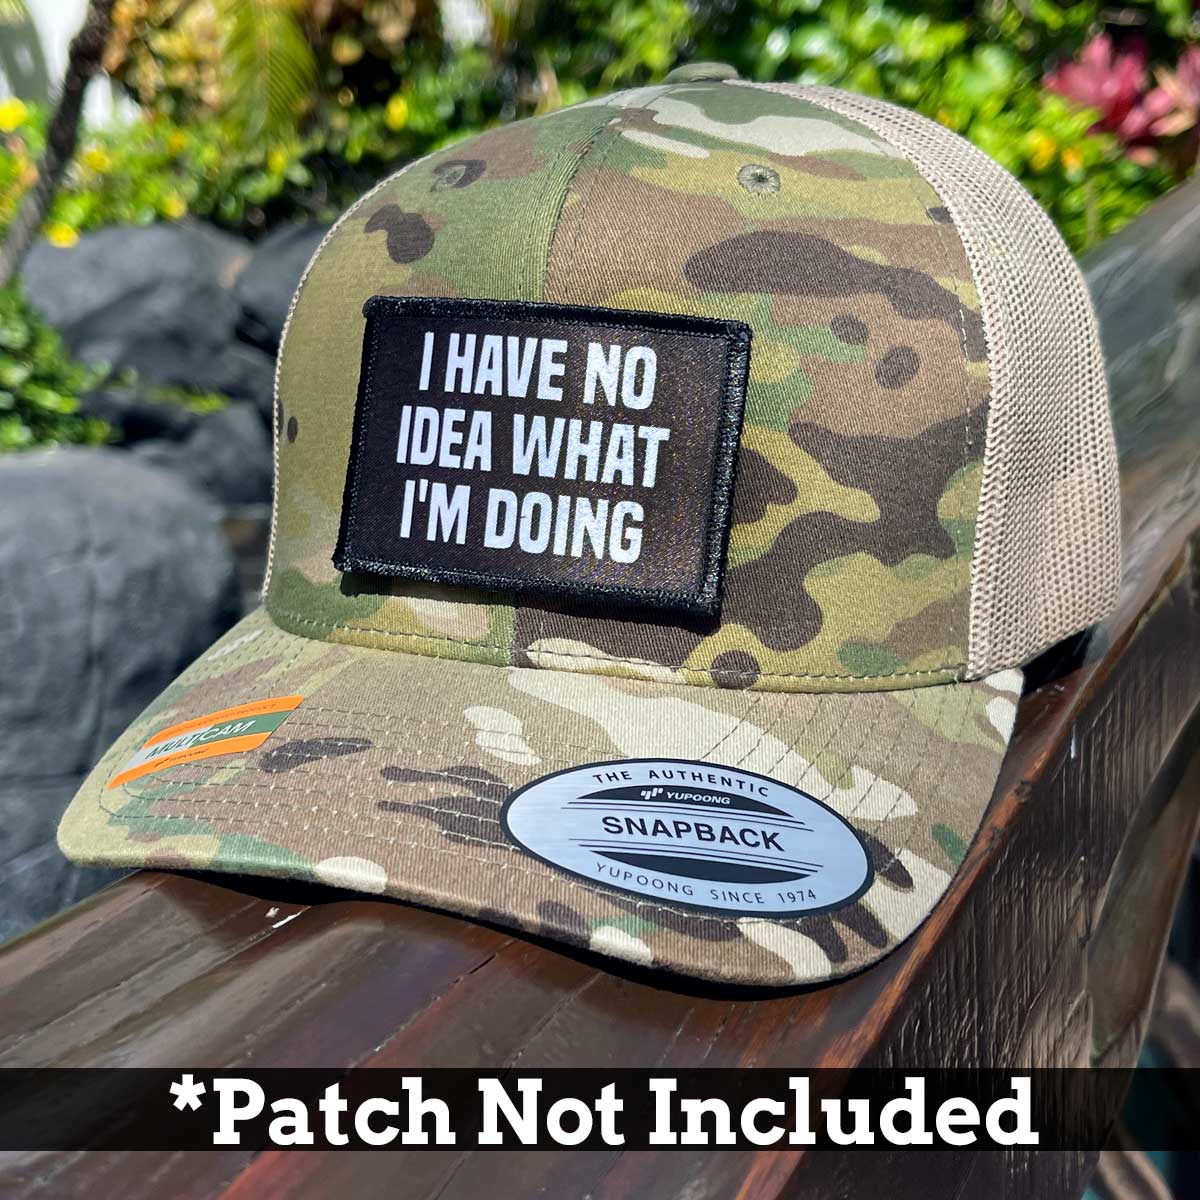 MULTICAM® Retro Trucker Pull Patch Hat by SNAPBACK - Camo and Khaki - Pull Patch - Removable Patches For Authentic Flexfit and Snapback Hats